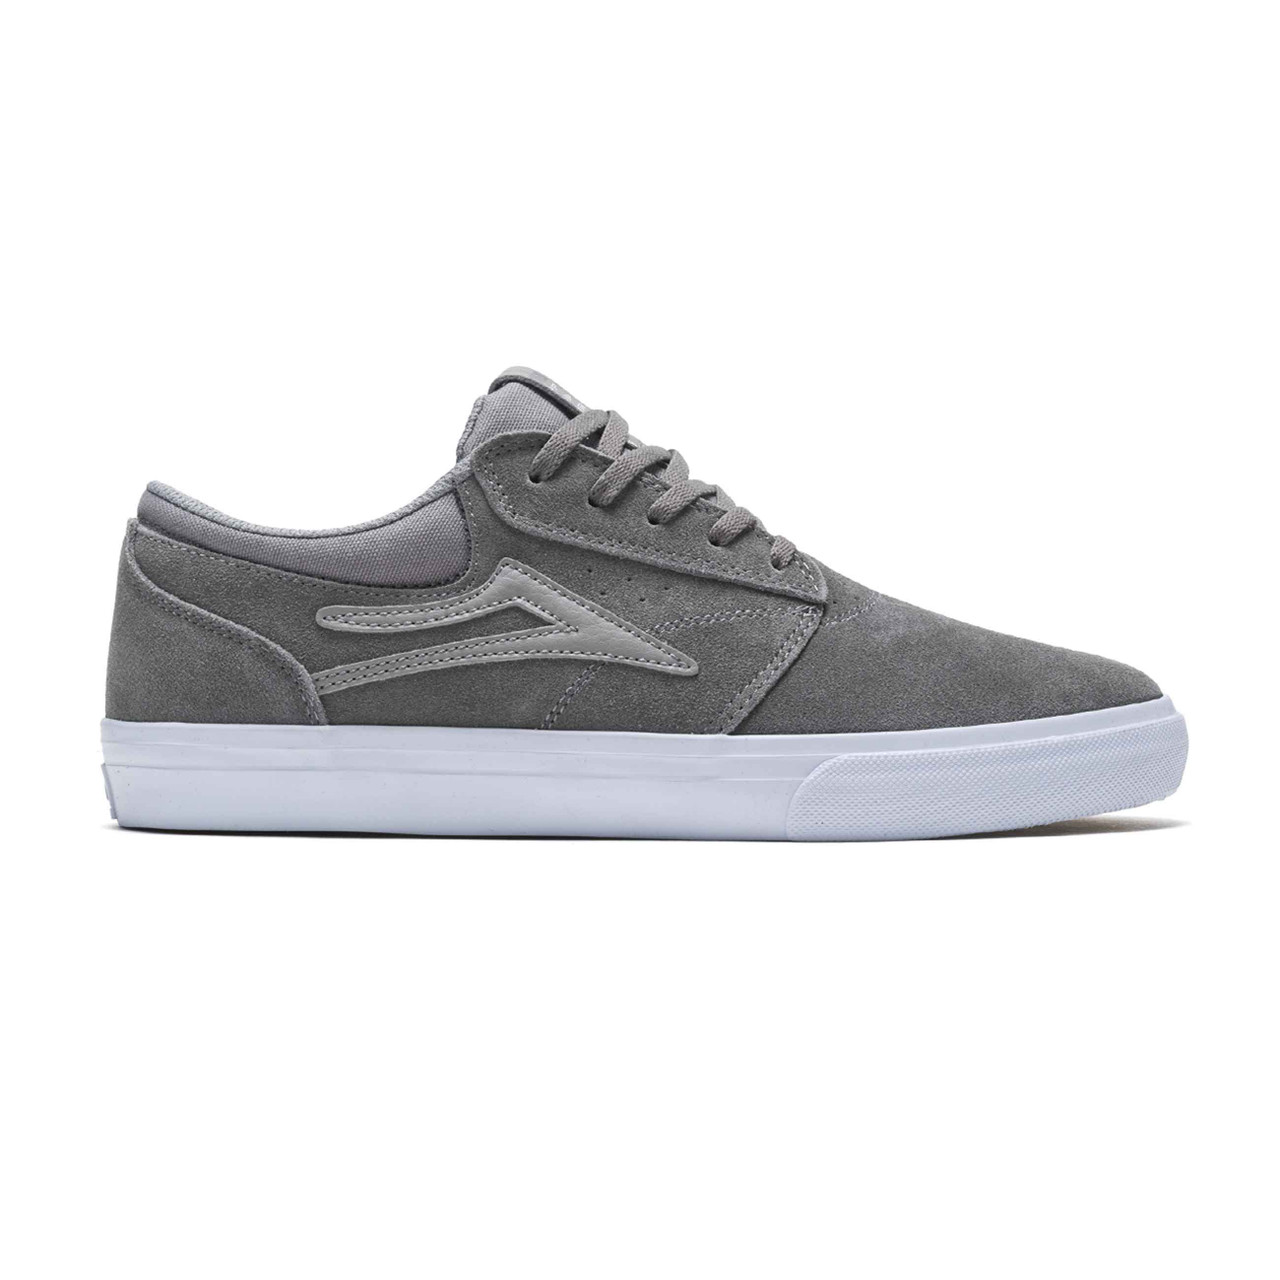 Lakai Griffin Skate Shoes Trainers Grey Suede - Hyped Sports